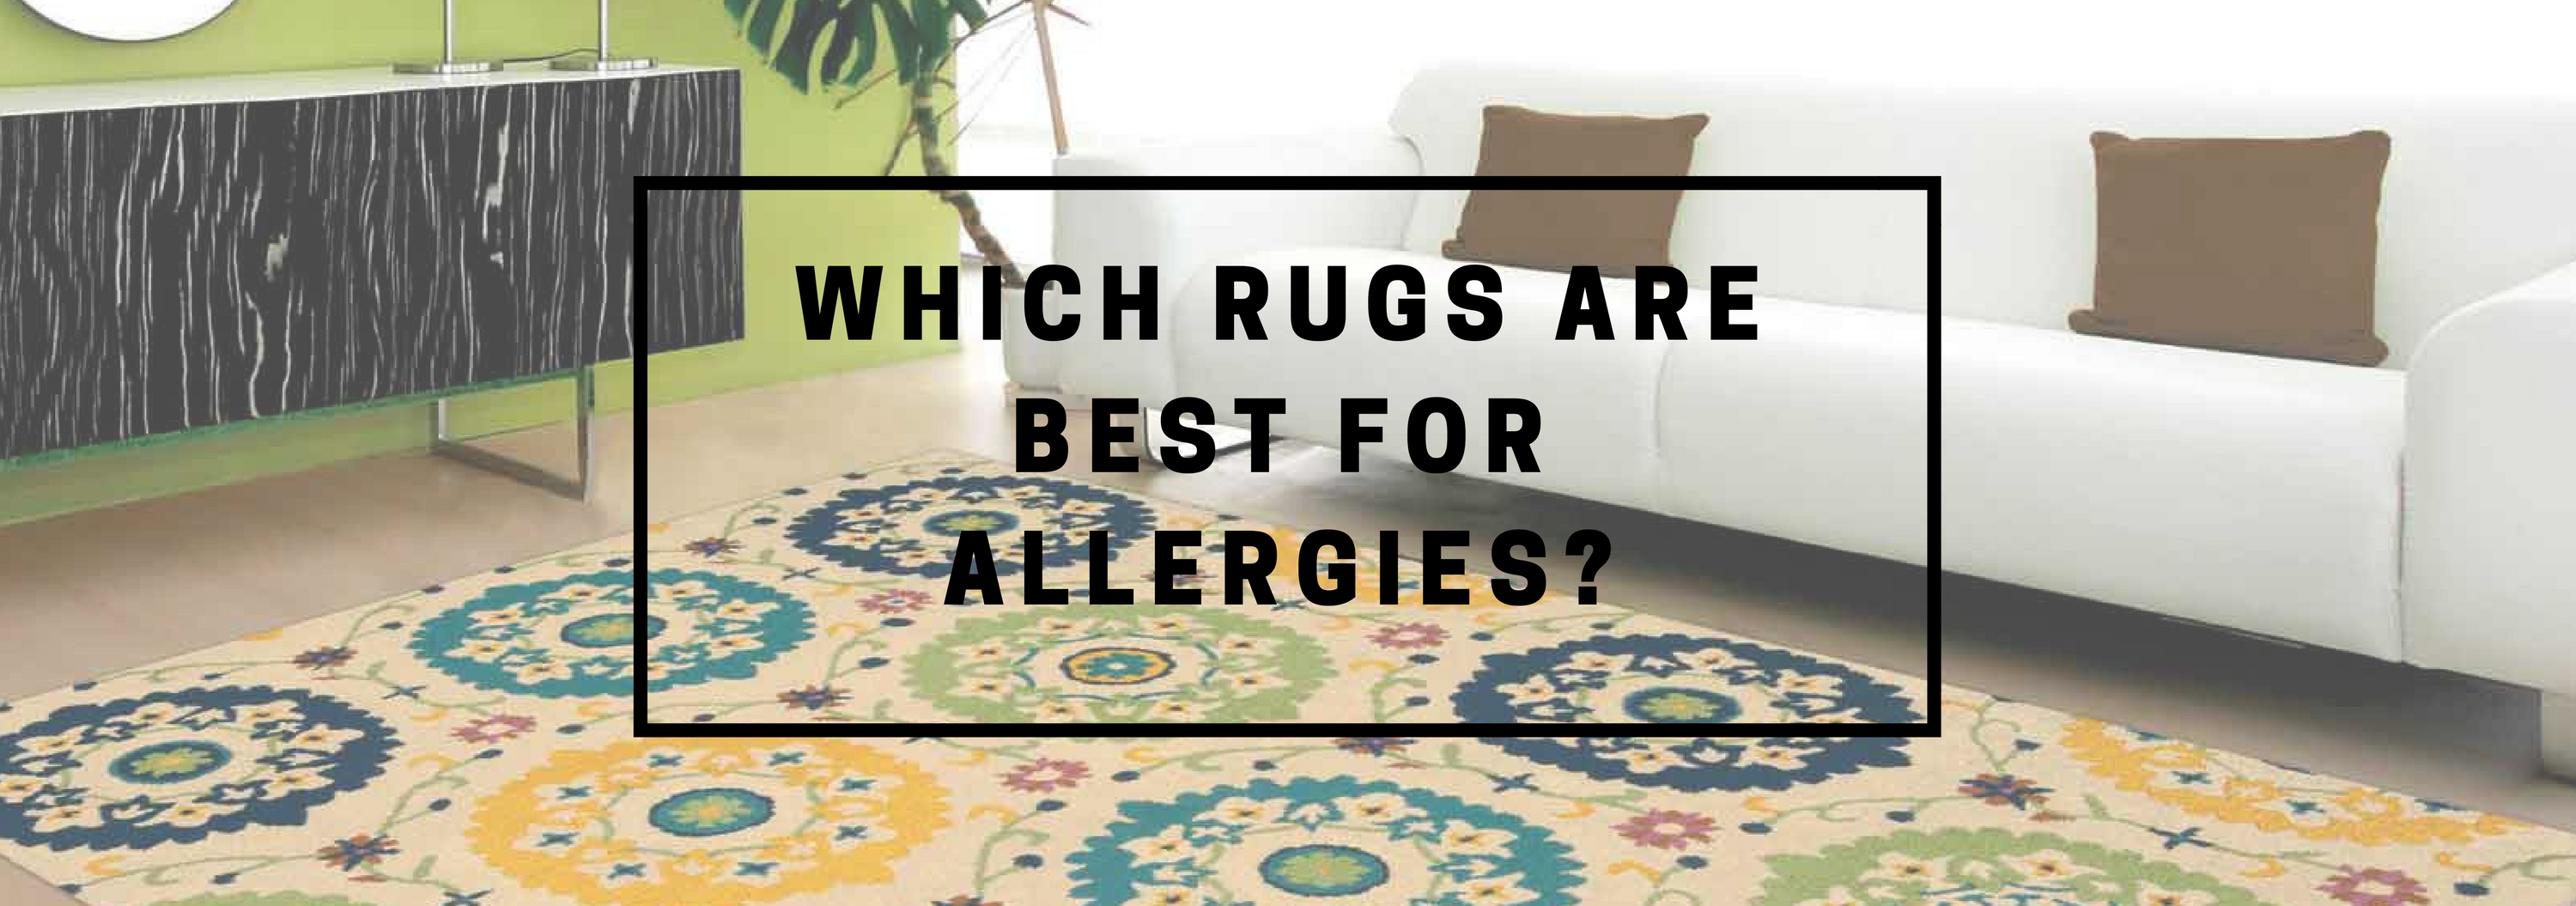 Rug Allergies And Suitable Rugs, Best Rugs For Allergy Sufferers